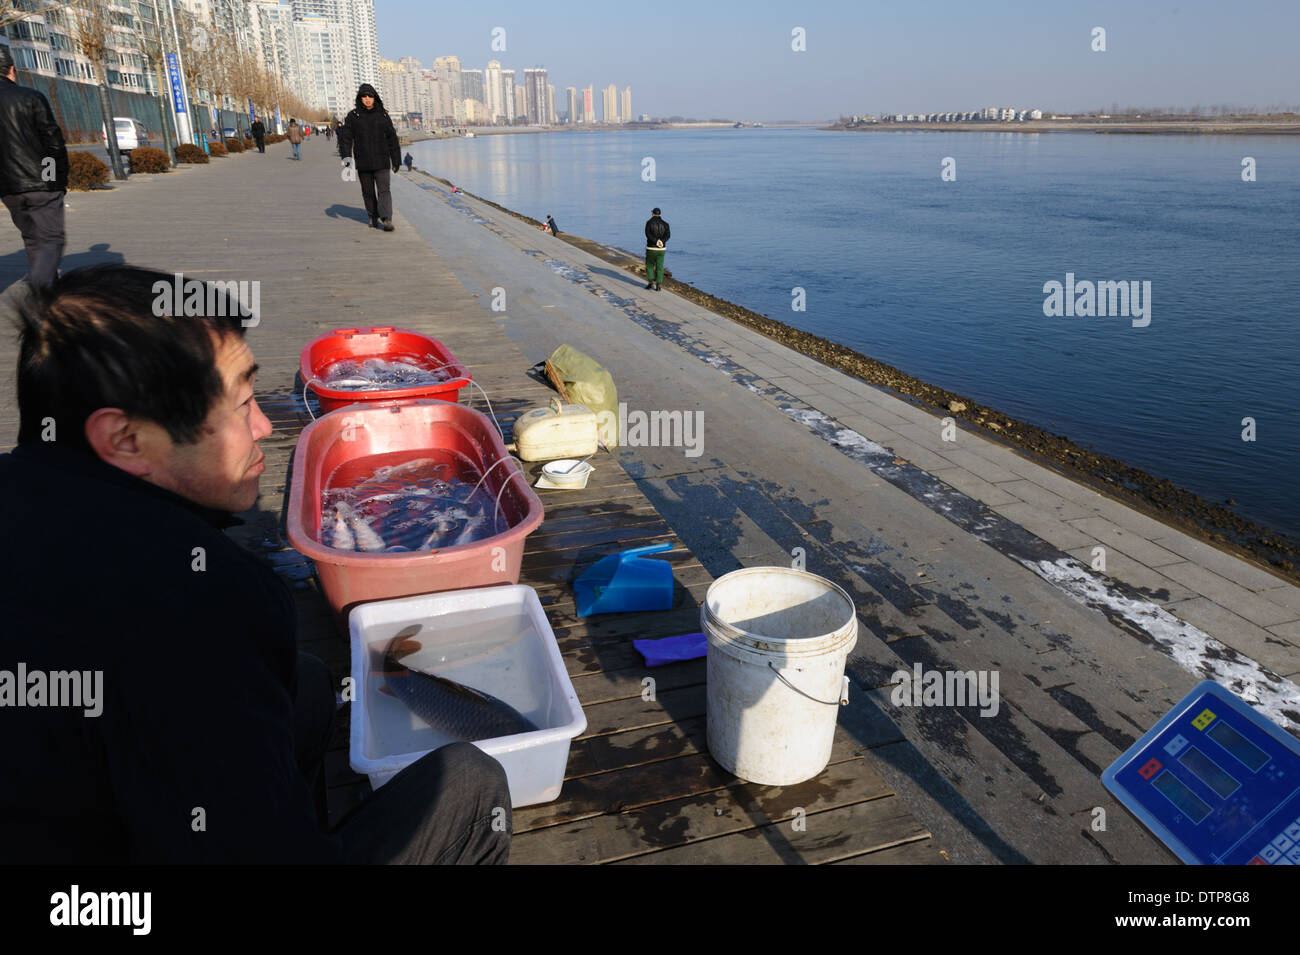 Fish seller on the Chinese side of the Yalu river. North Korea on the other side. Dandong, Liaoning province. China Stock Photo